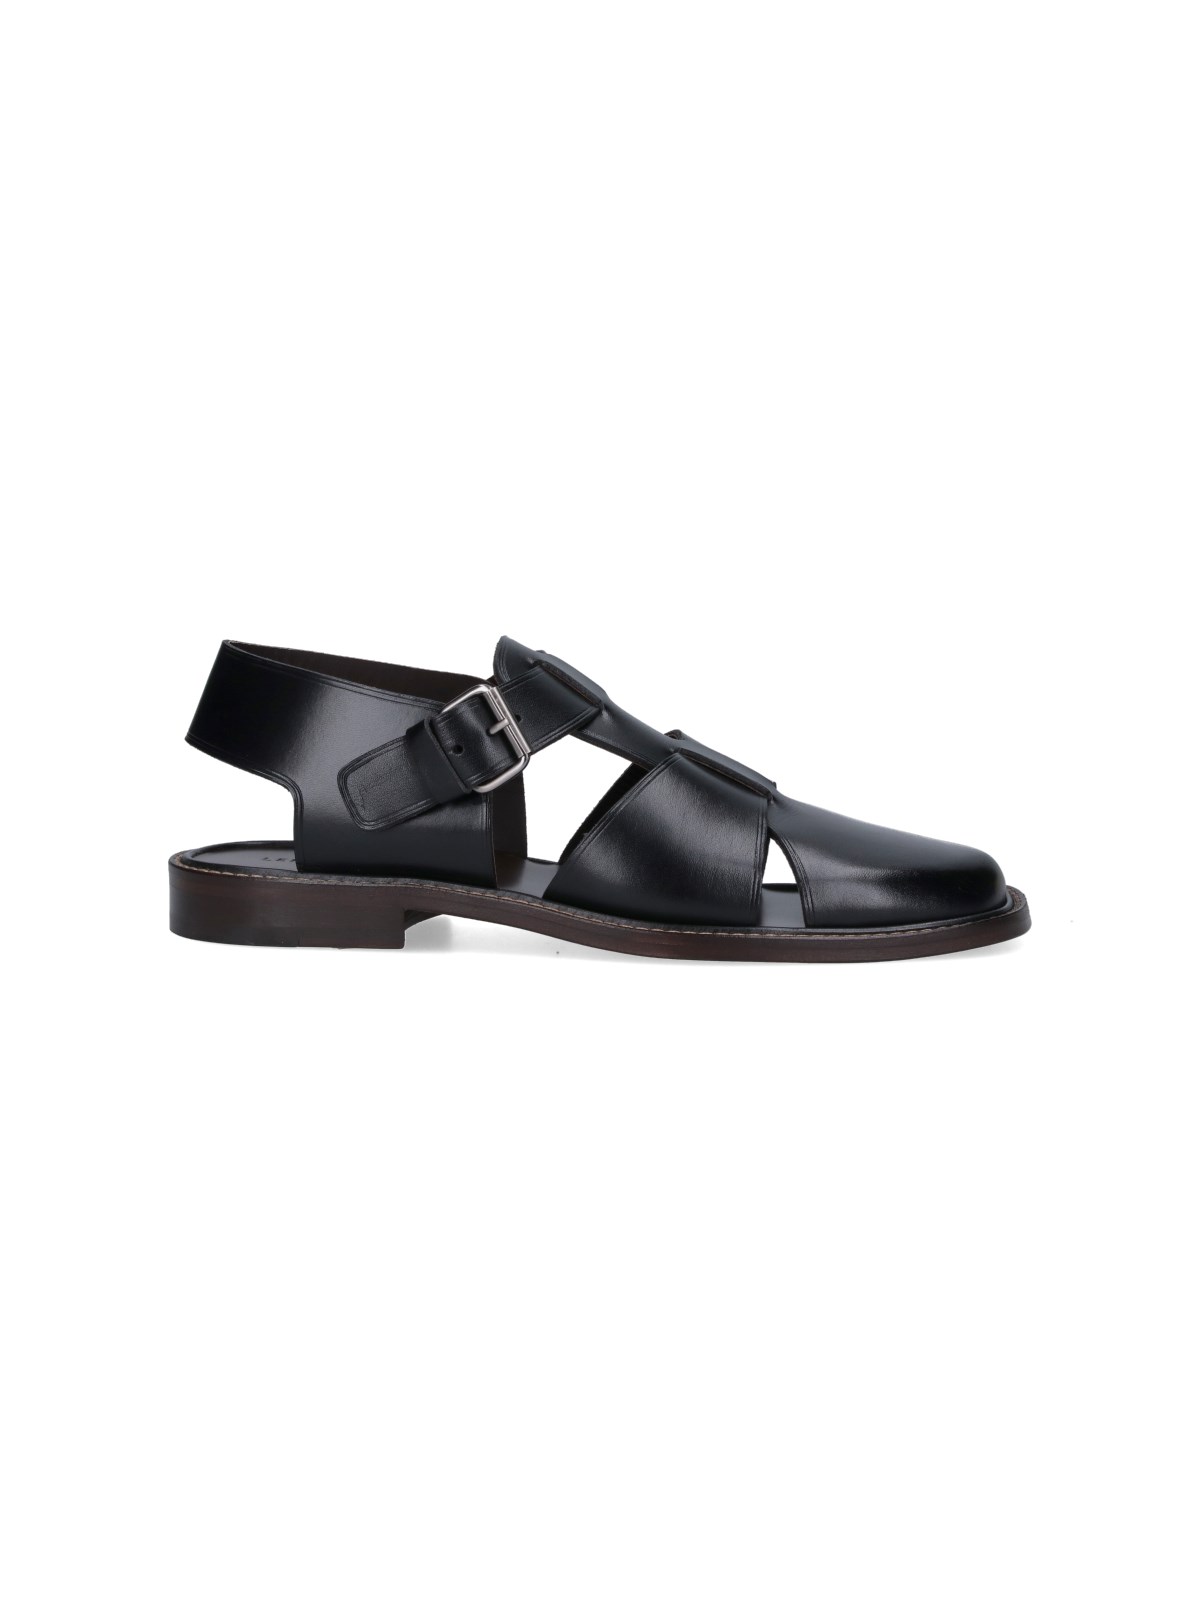 Lemaire Fisherman Leather Sandals In Black | ModeSens